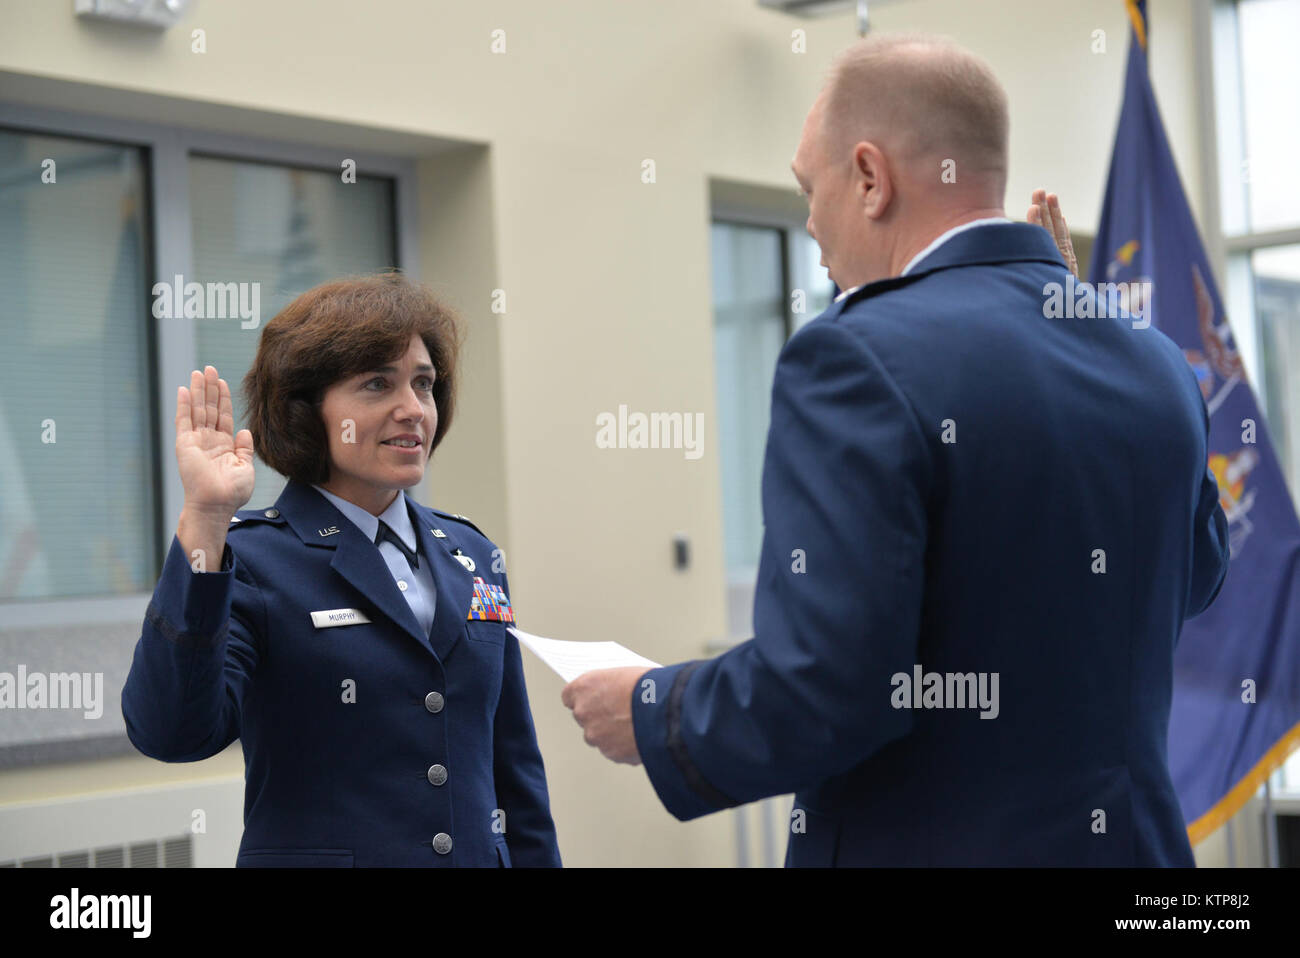 LATHAM- Brig Gen. Kevin Bradley administers the oath of office to Col. Maureen Murphy, director of staff for the New York Air National Guard during promotion ceremonies at New York National Guard headquarters on Friday, June 13. Stock Photo